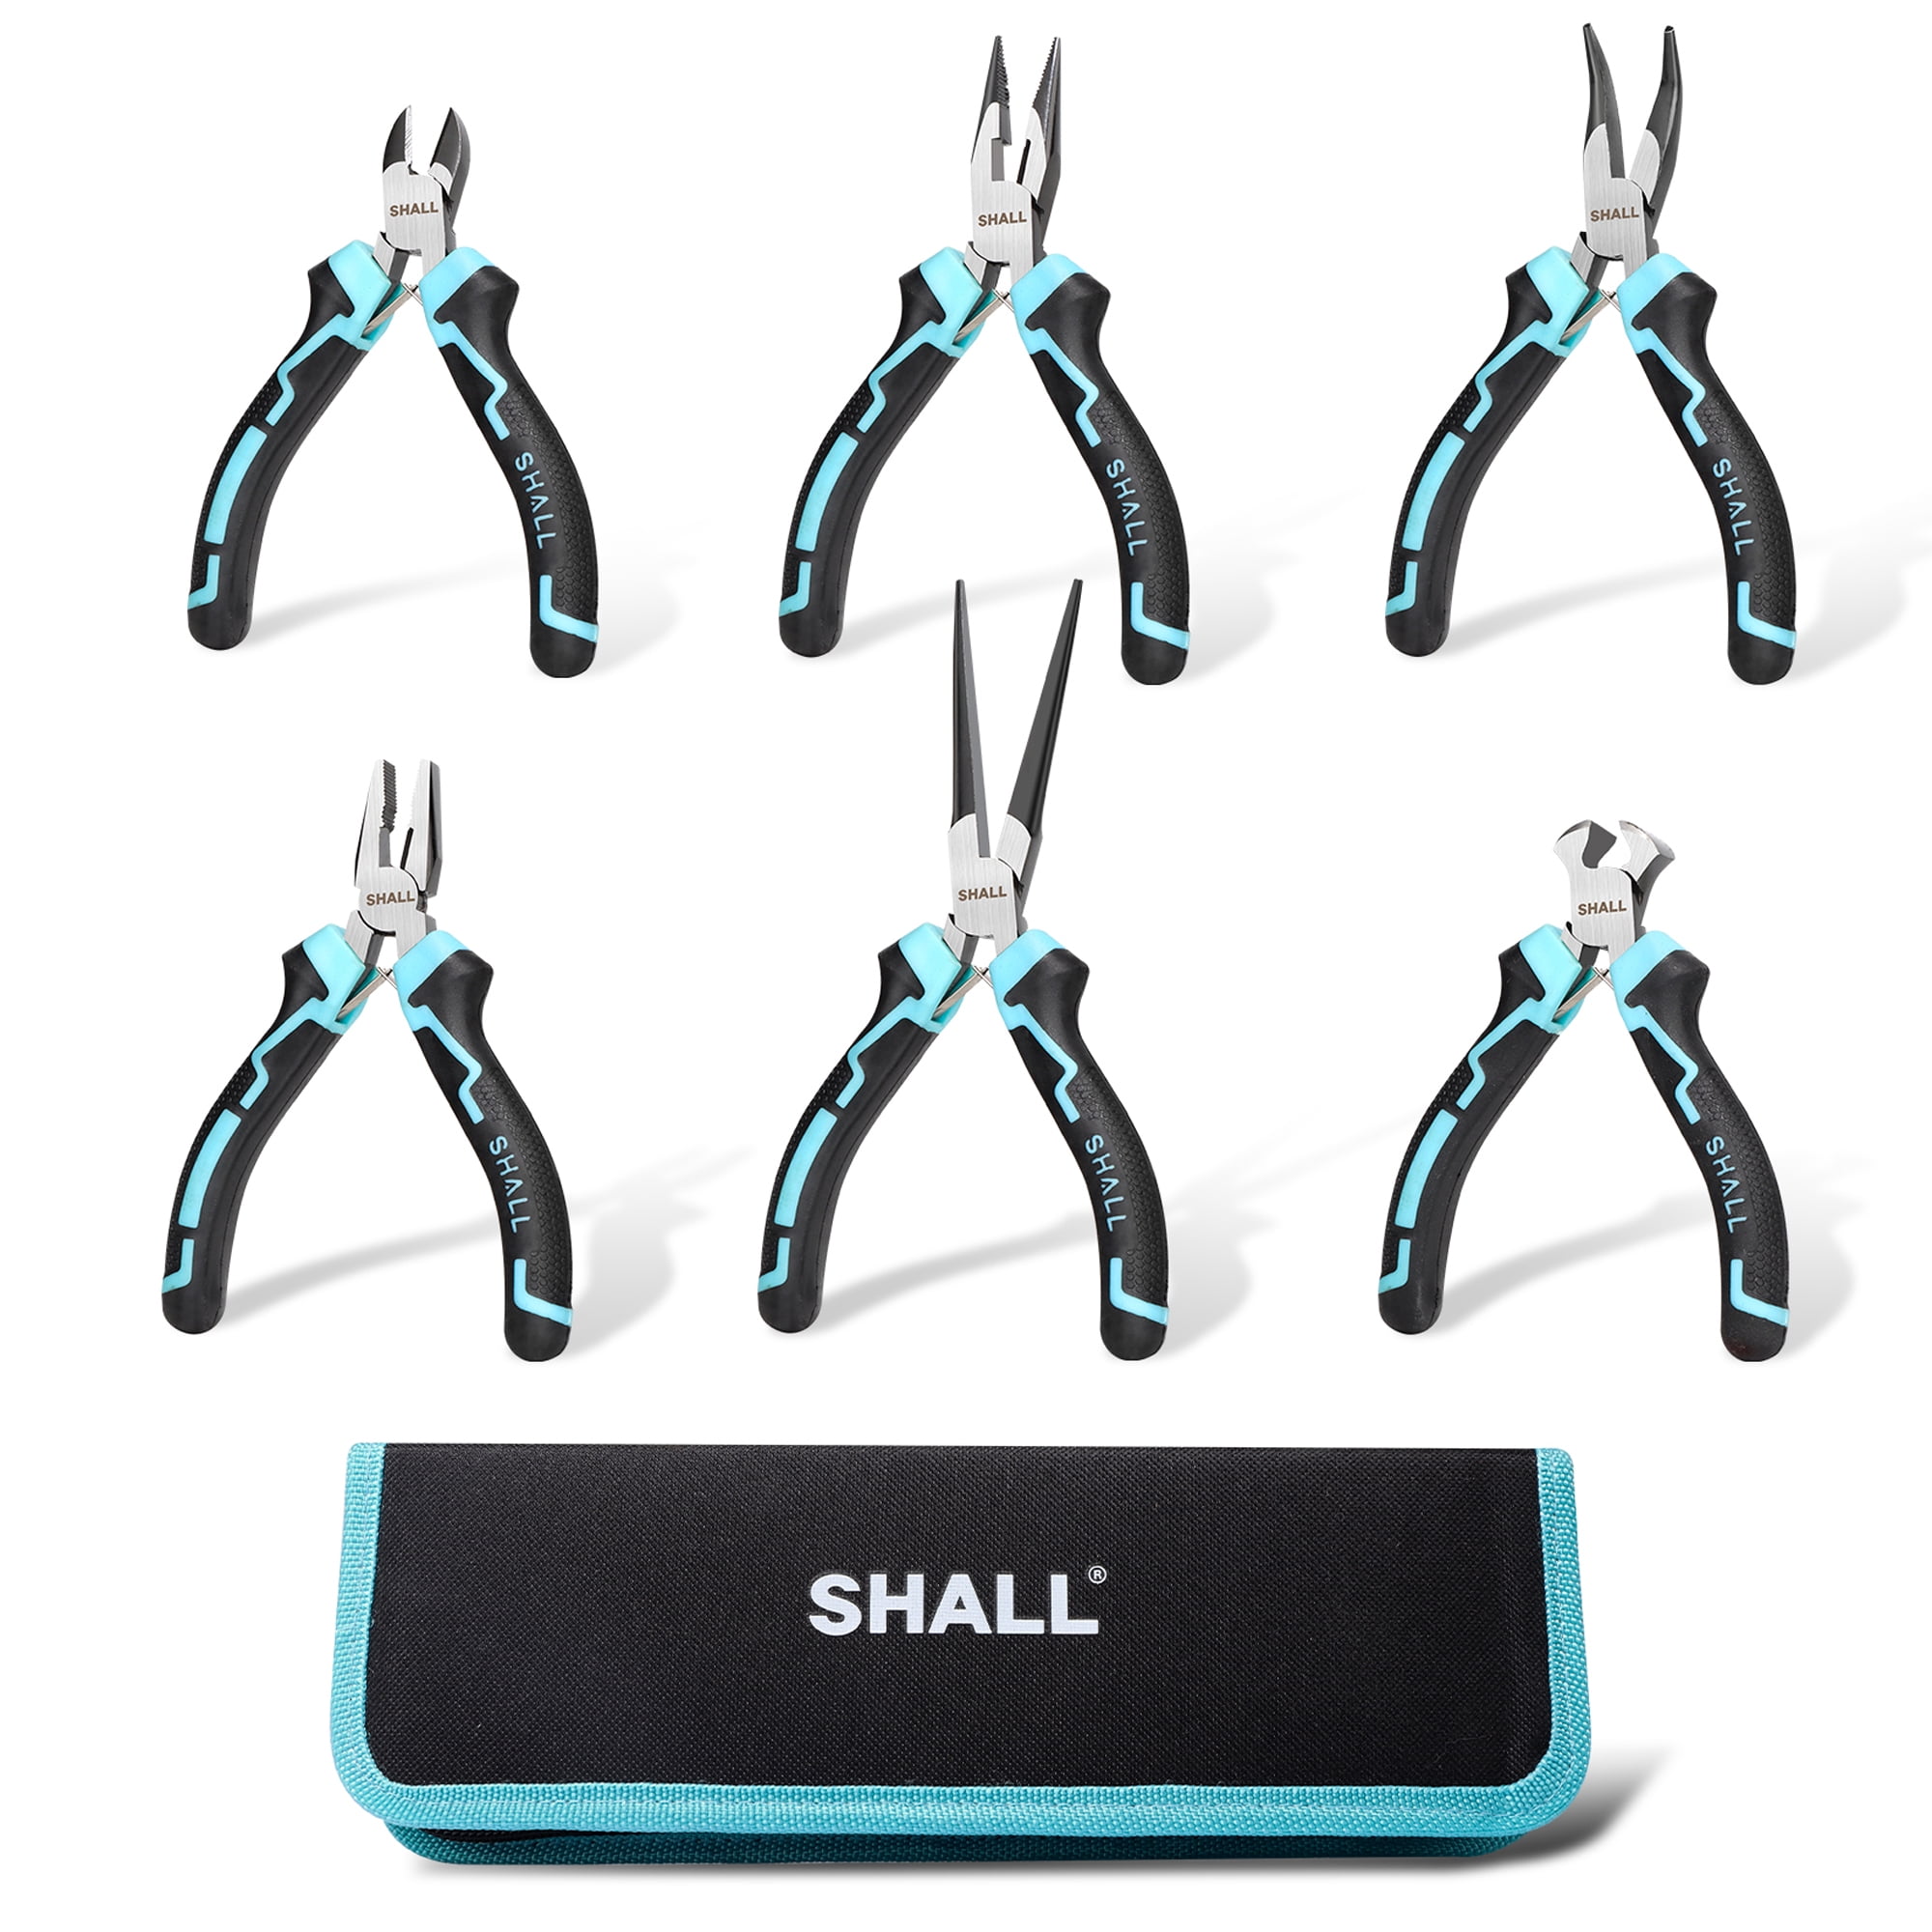 SHALL Mini Pliers Set, 6-Piece Small Pliers Tool Set Includes Needle Nose,  Long Nose, Bent Nose, Diagonal, End Cutting and Linesman for Making Crafts